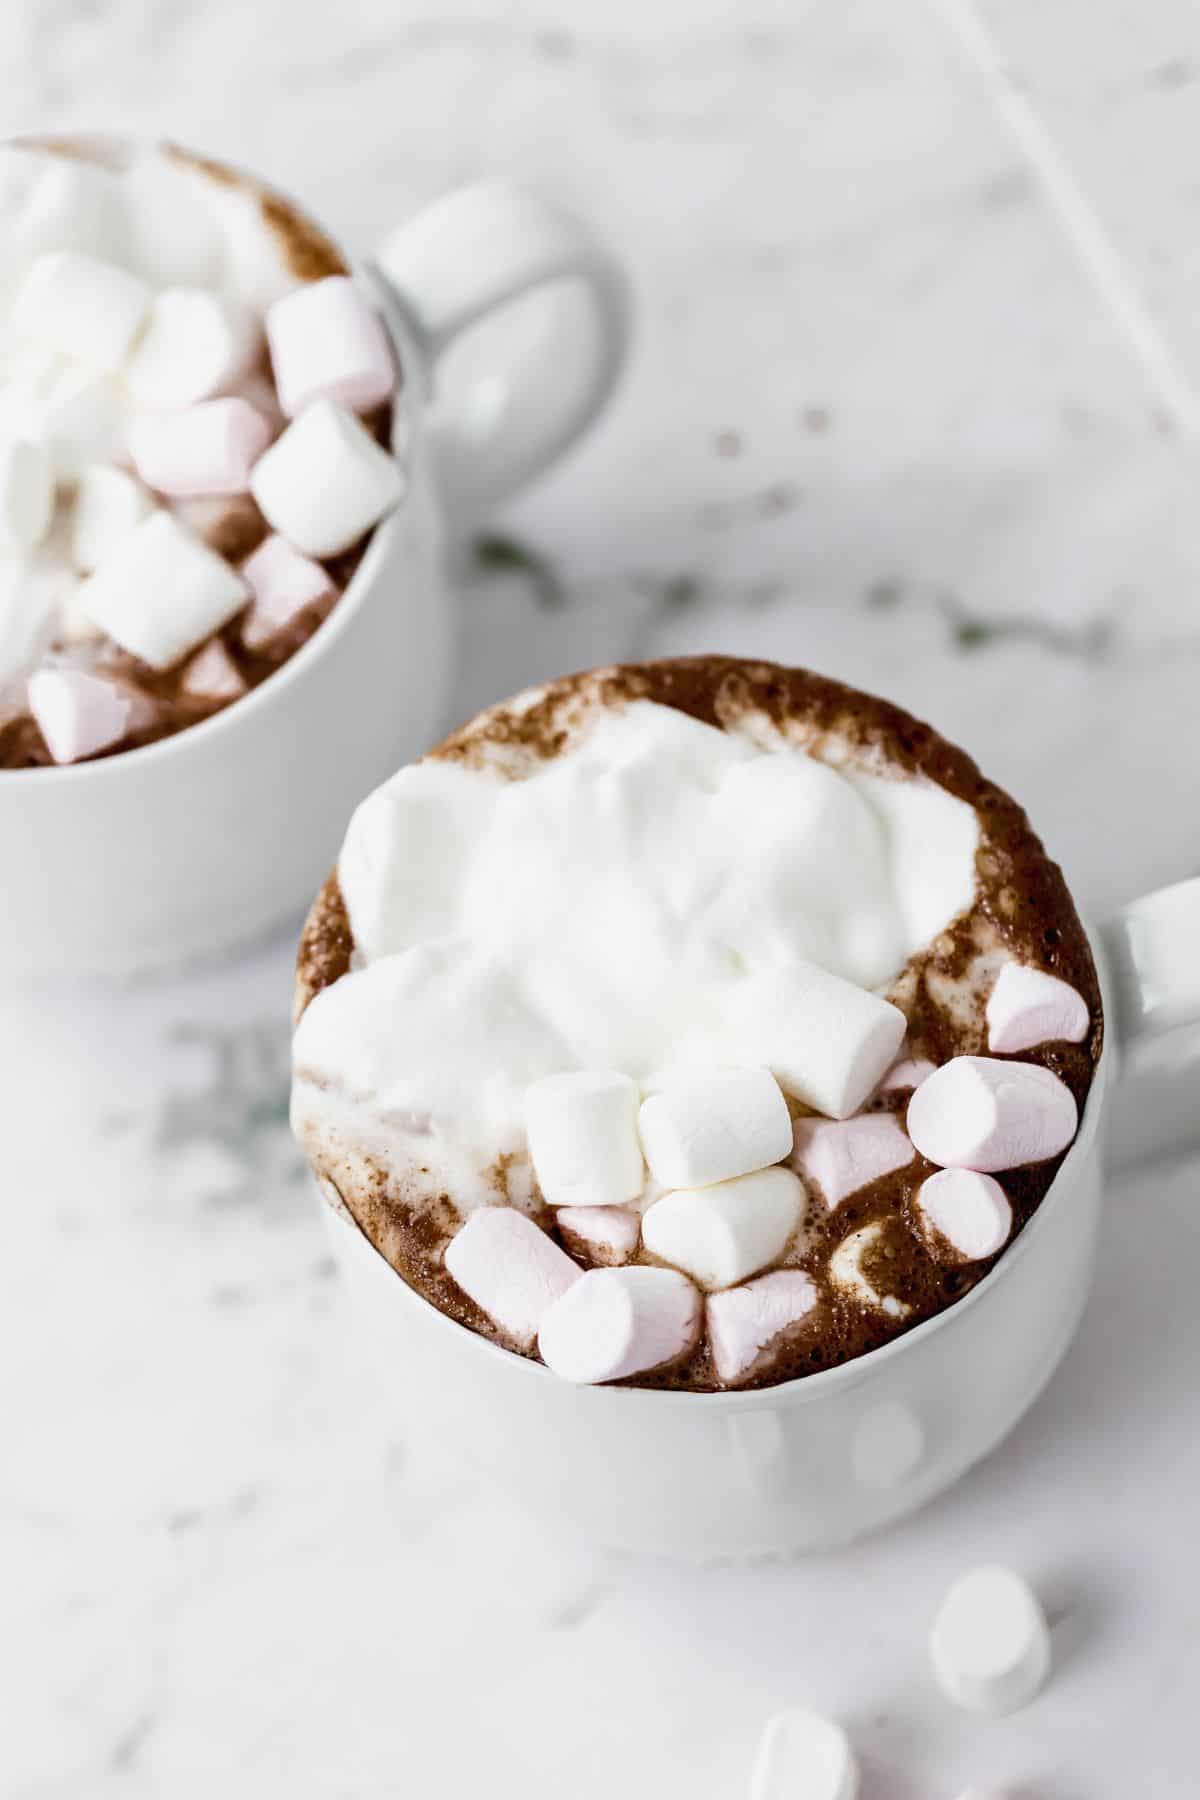 Dollop of whipped cream on top of hot chocolate.